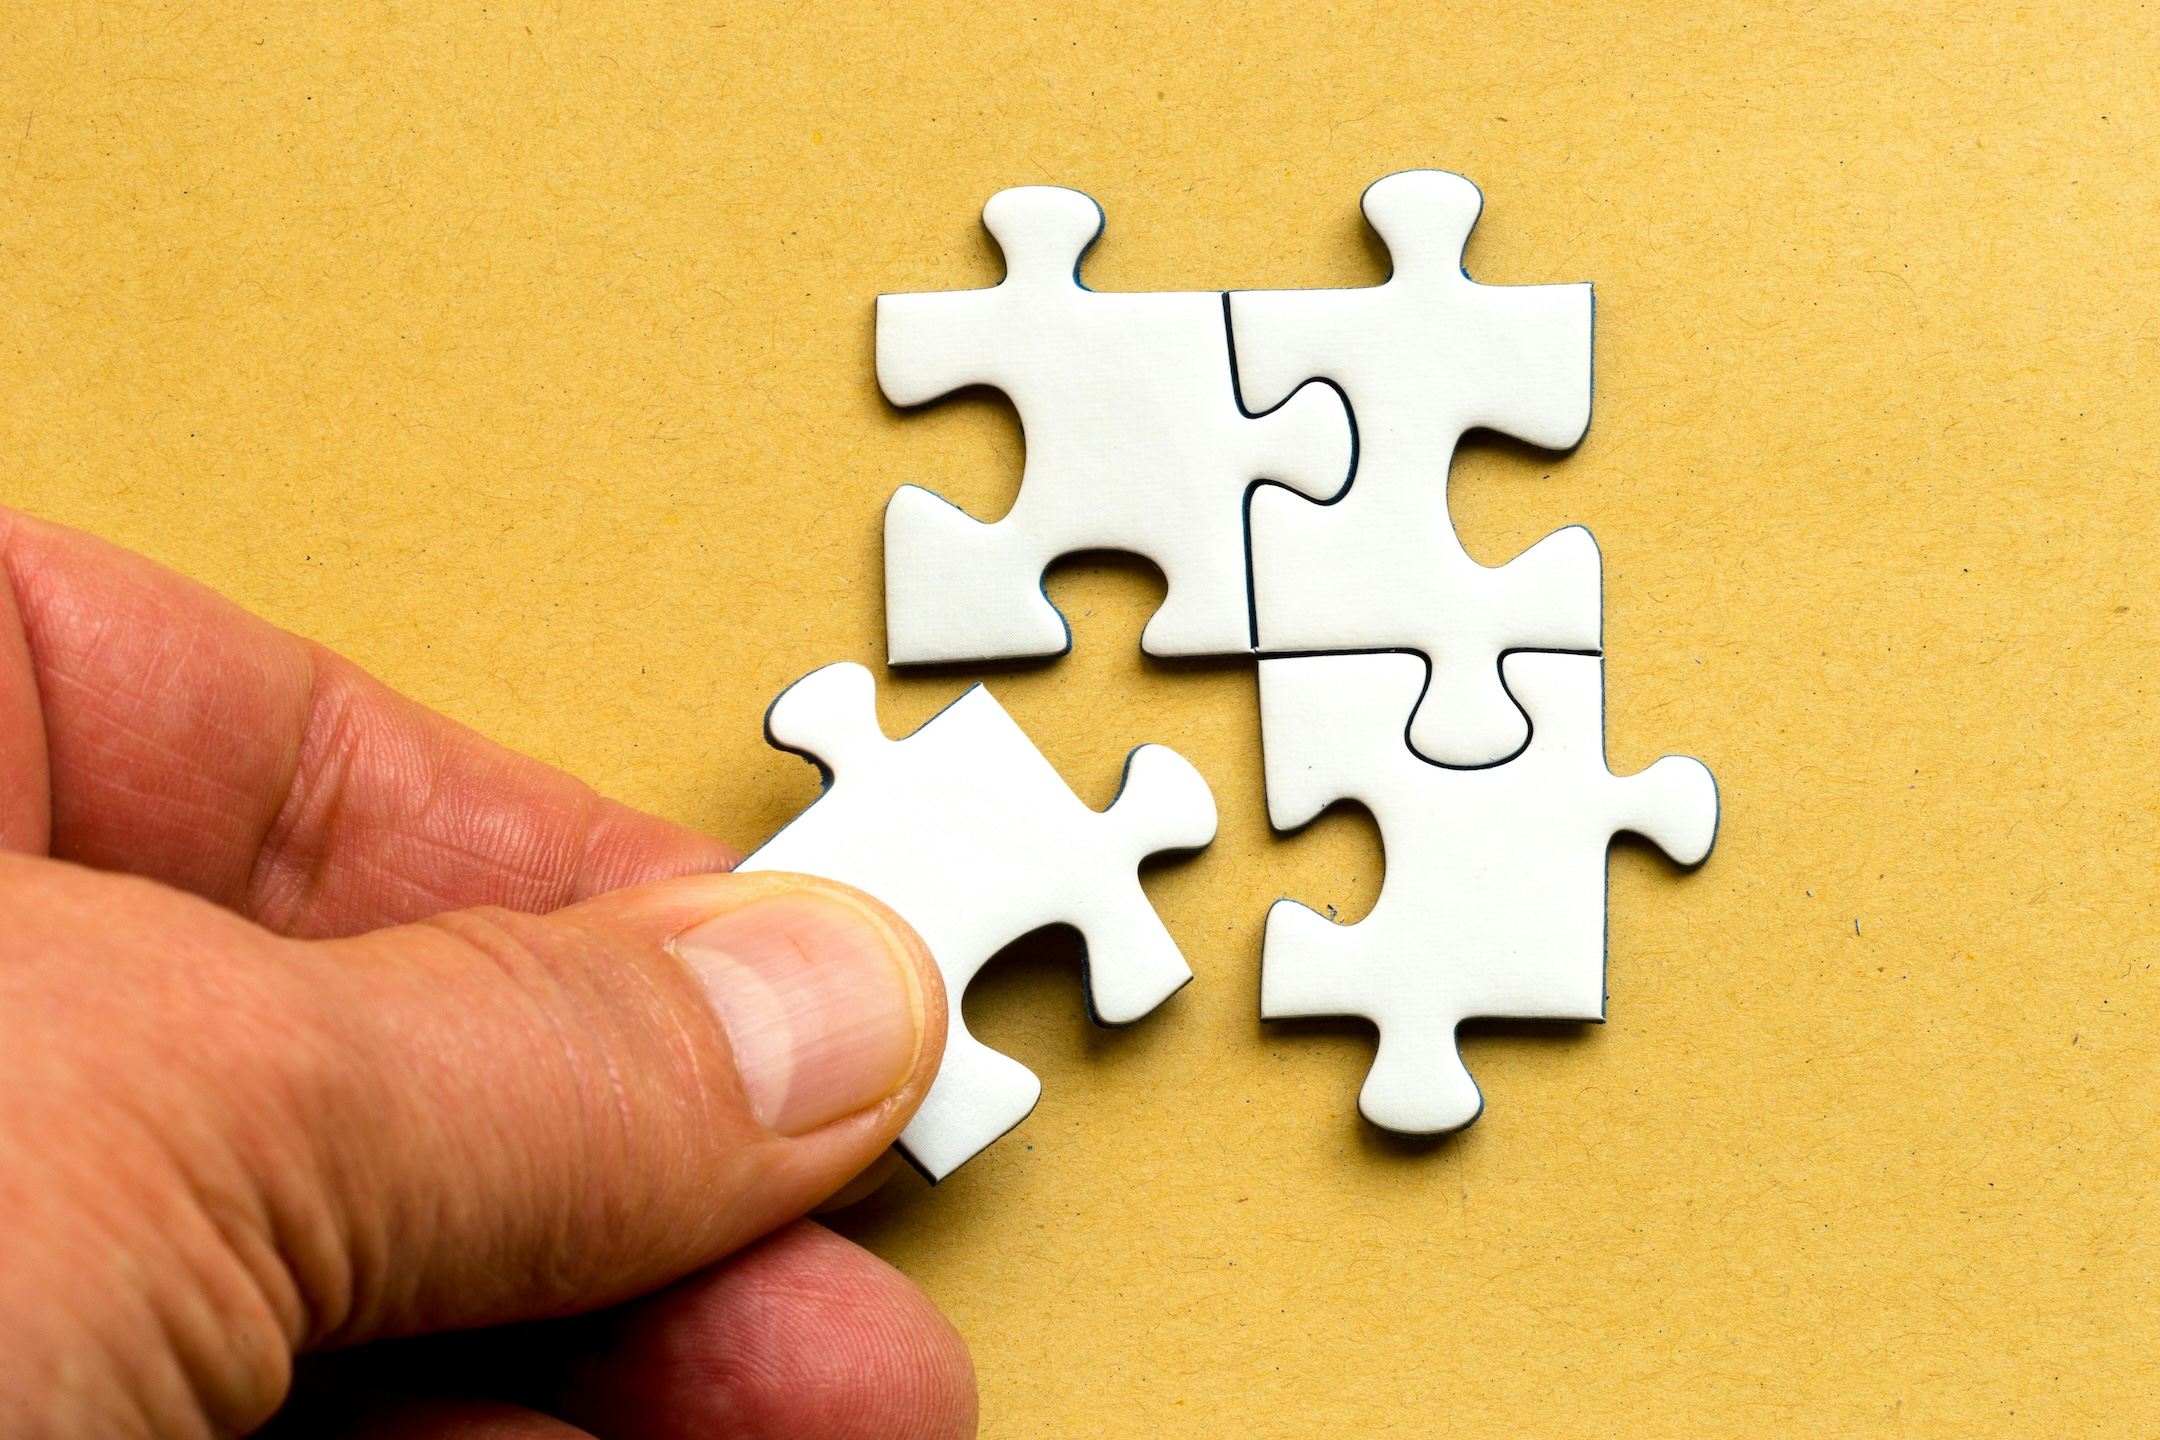 Close up of a hand placing a metallic jigsaw puzzle piece in a group of 4 pieces against a yellow background